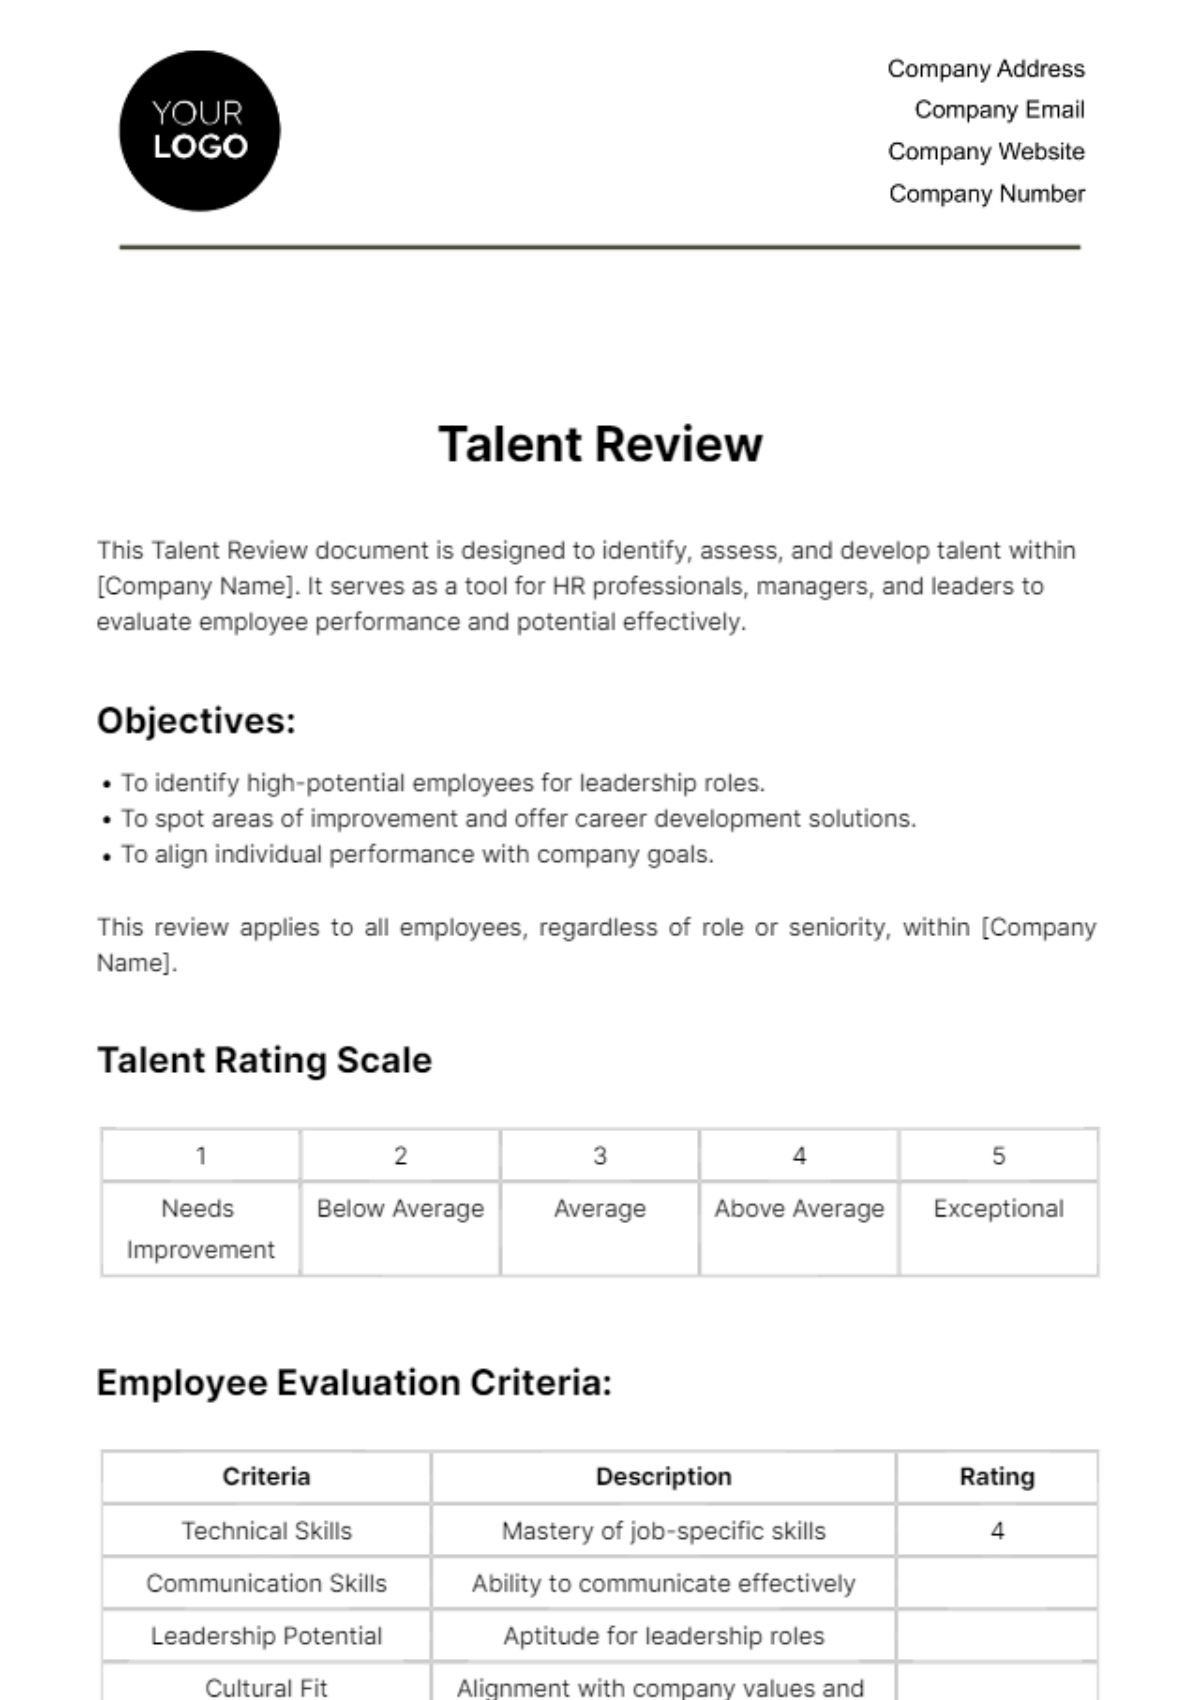 Talent Review HR Template